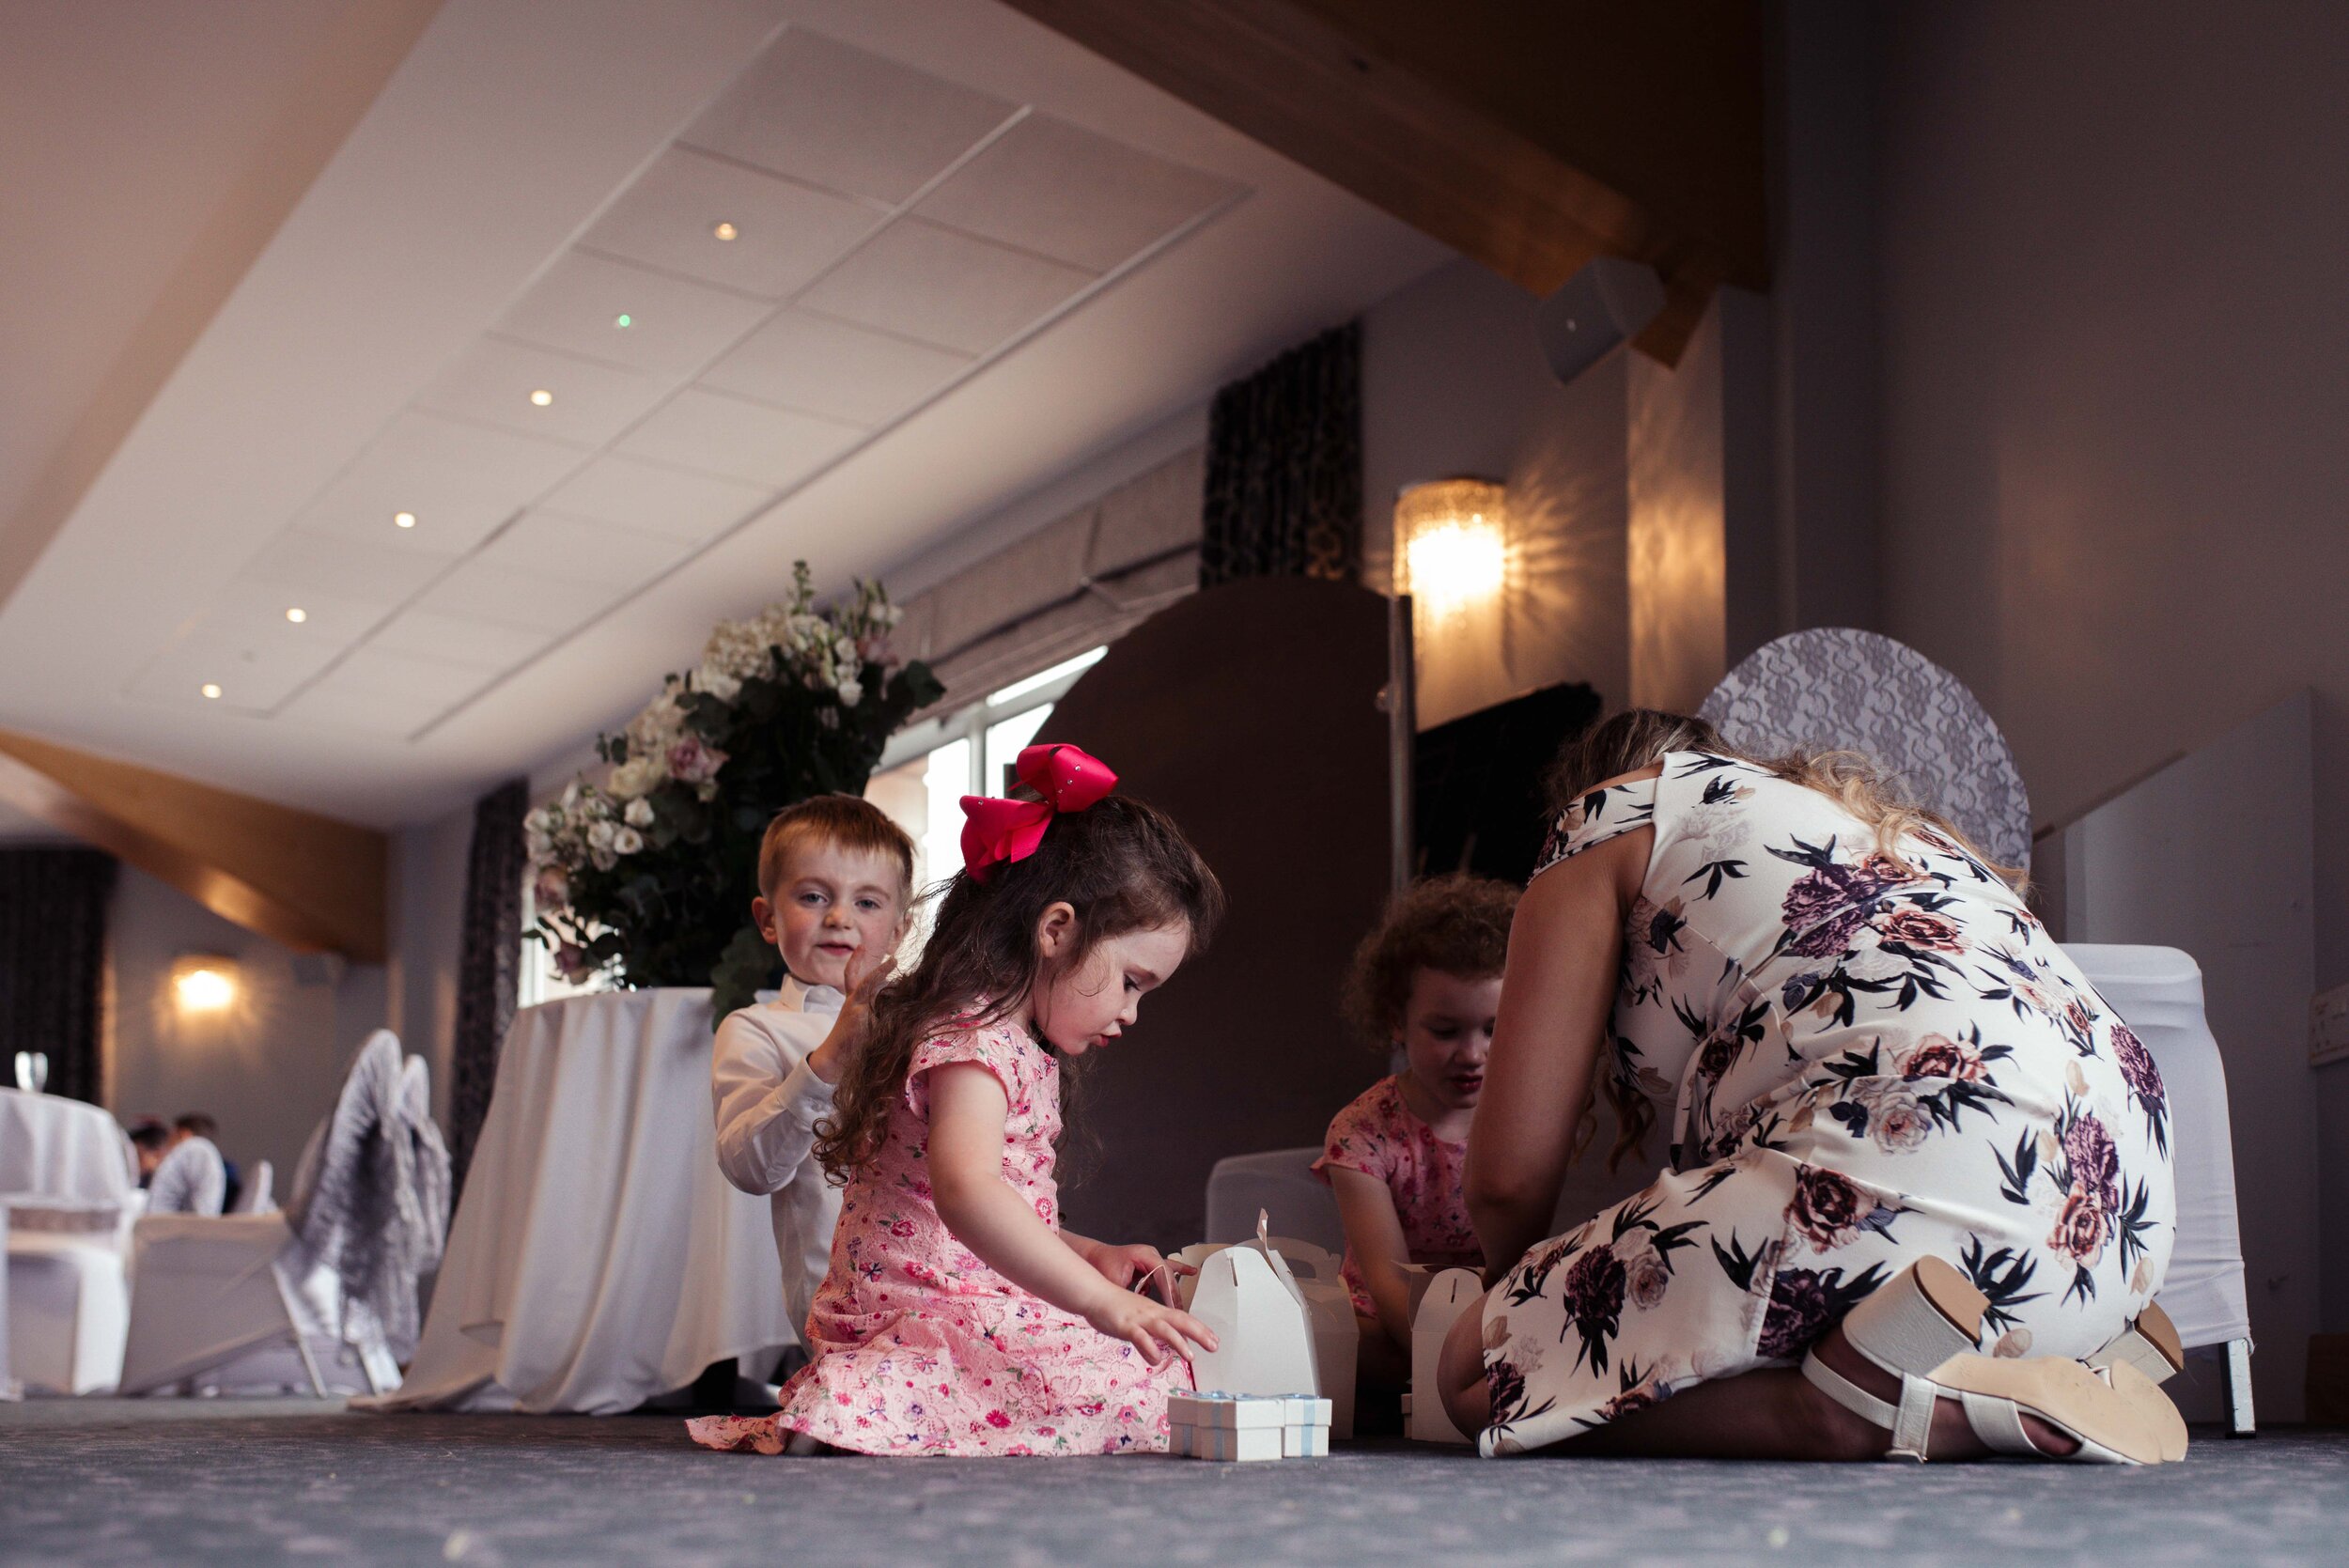 Children sit on the floor of the wedding venue and play games together